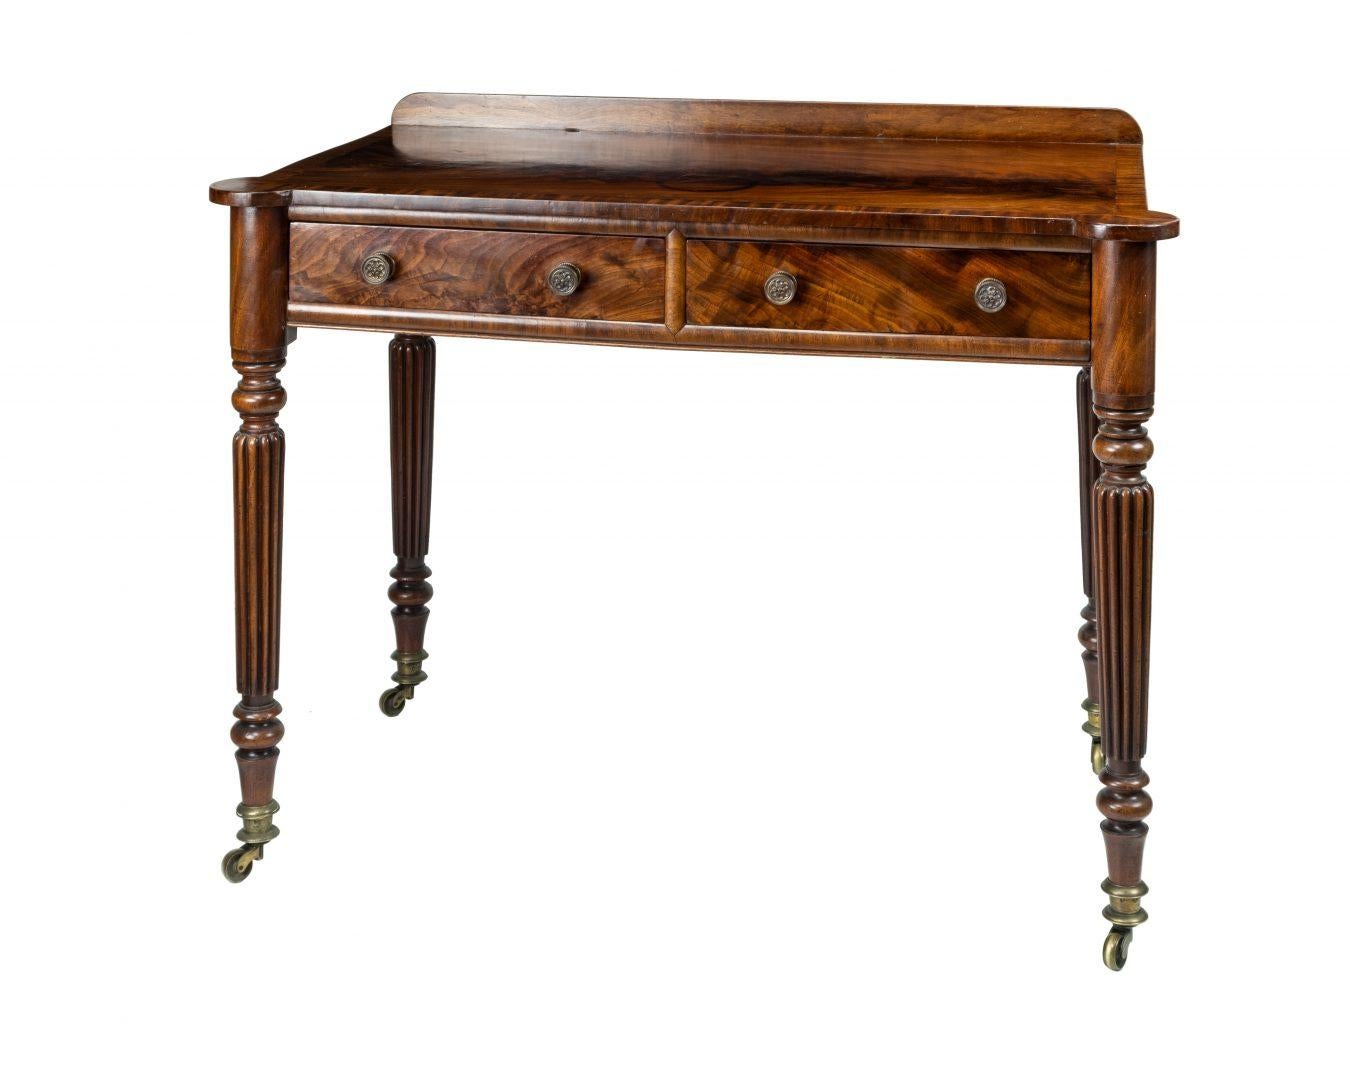 19th Century Figured Mahogany Side Table Attributed to Gillows 1